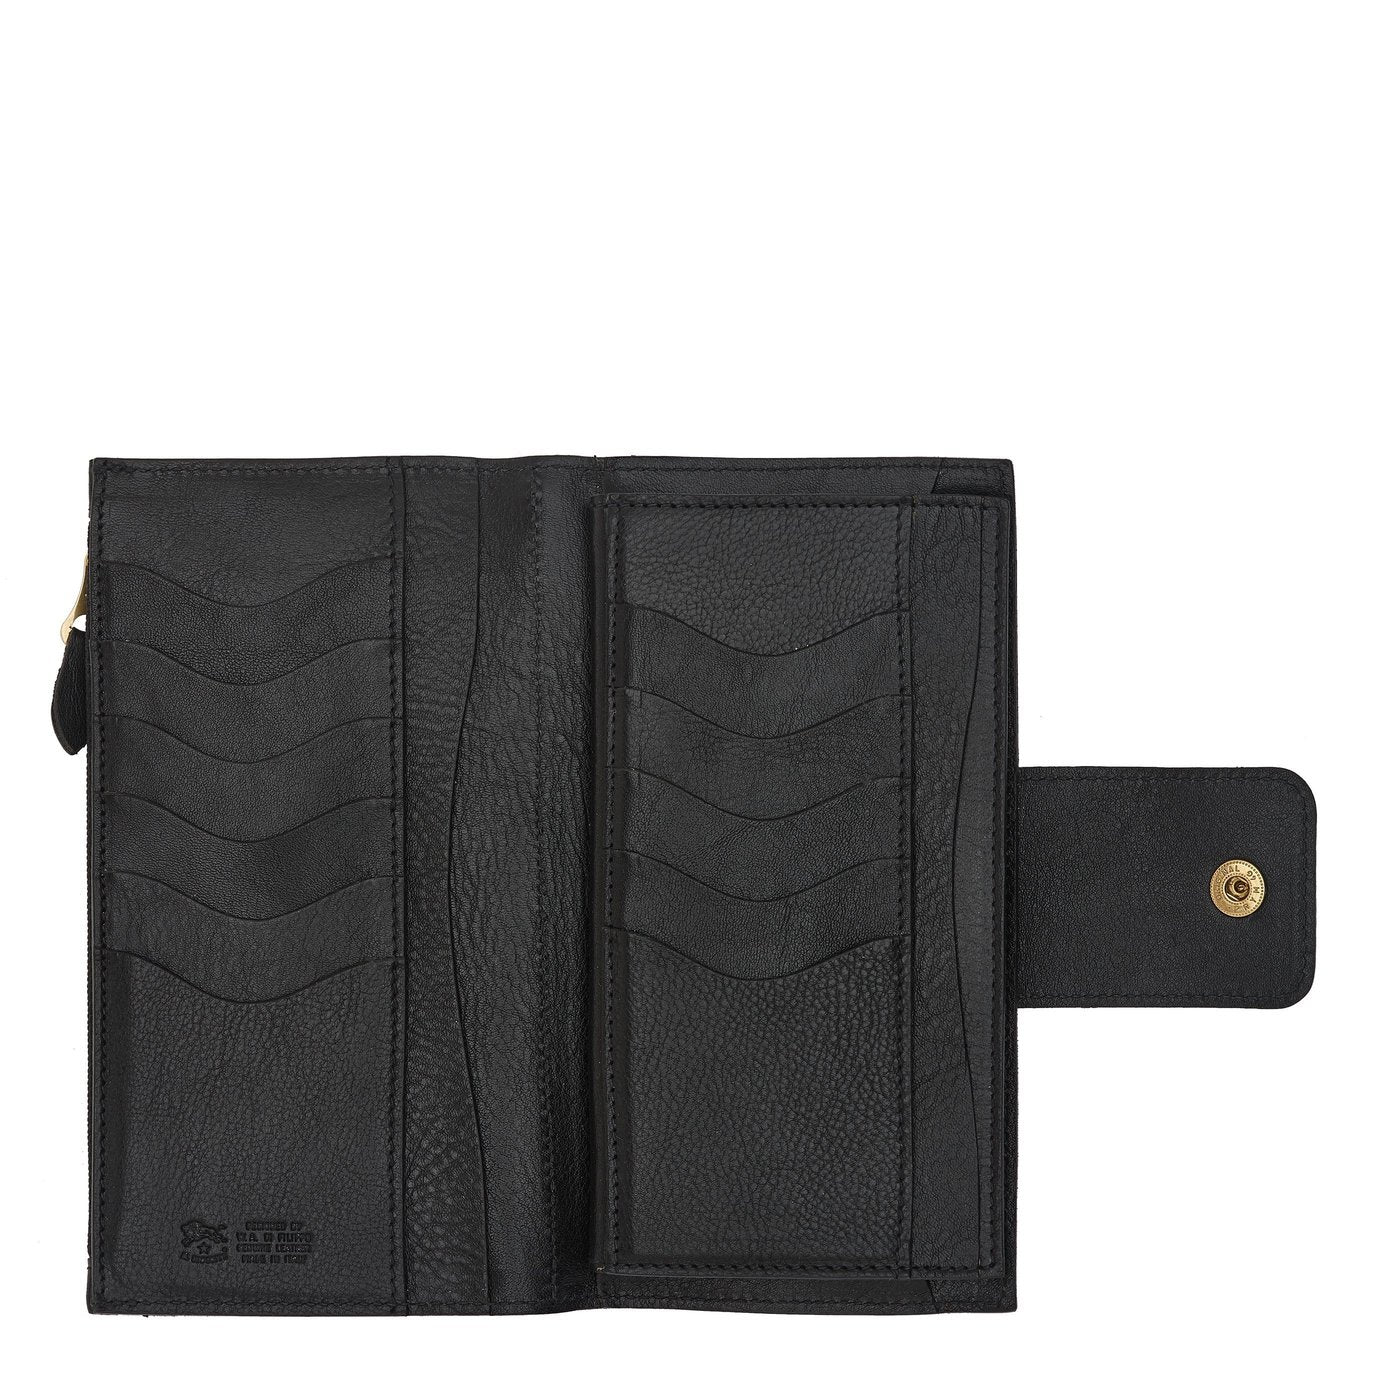 Women's Continental Wallet in Calf Leather color Black